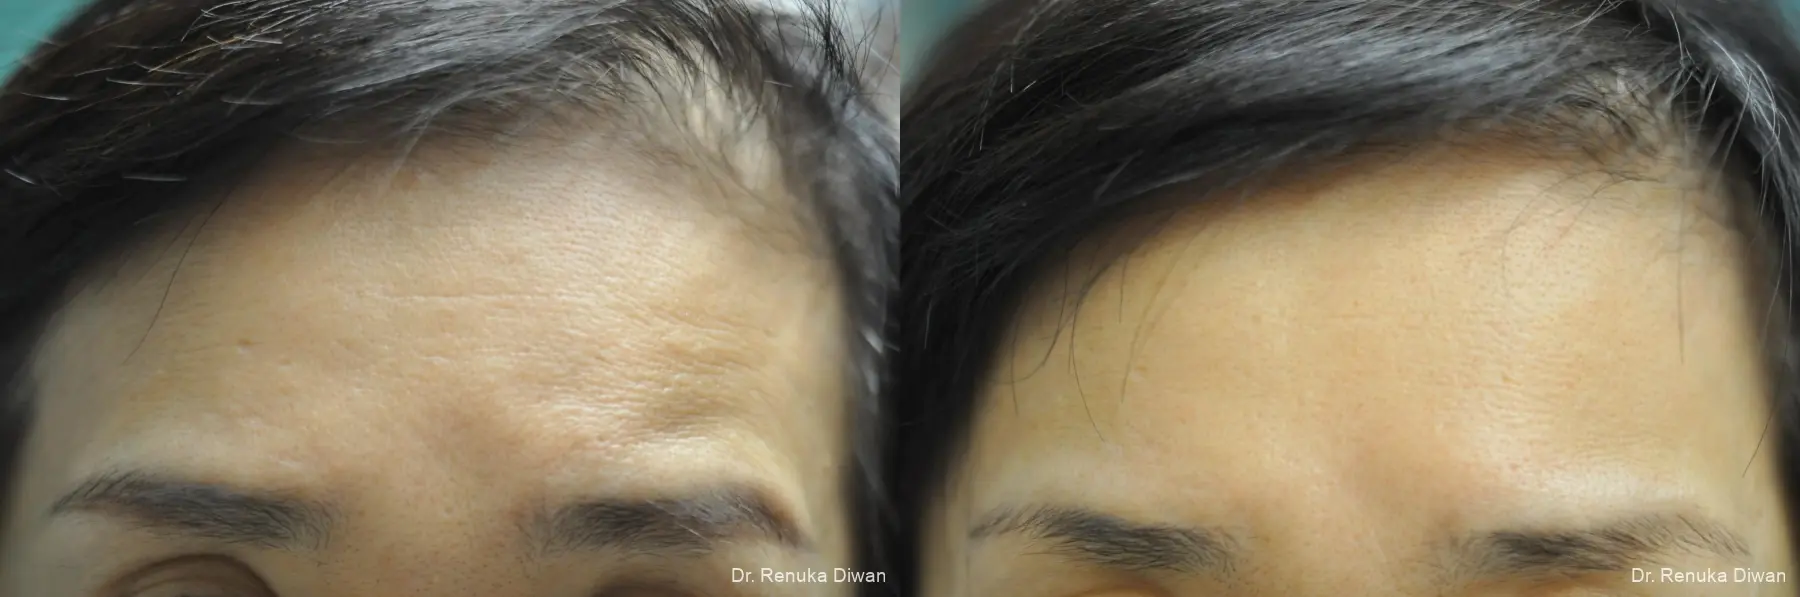 Forehead Creases: Patient 10 - Before and After 1